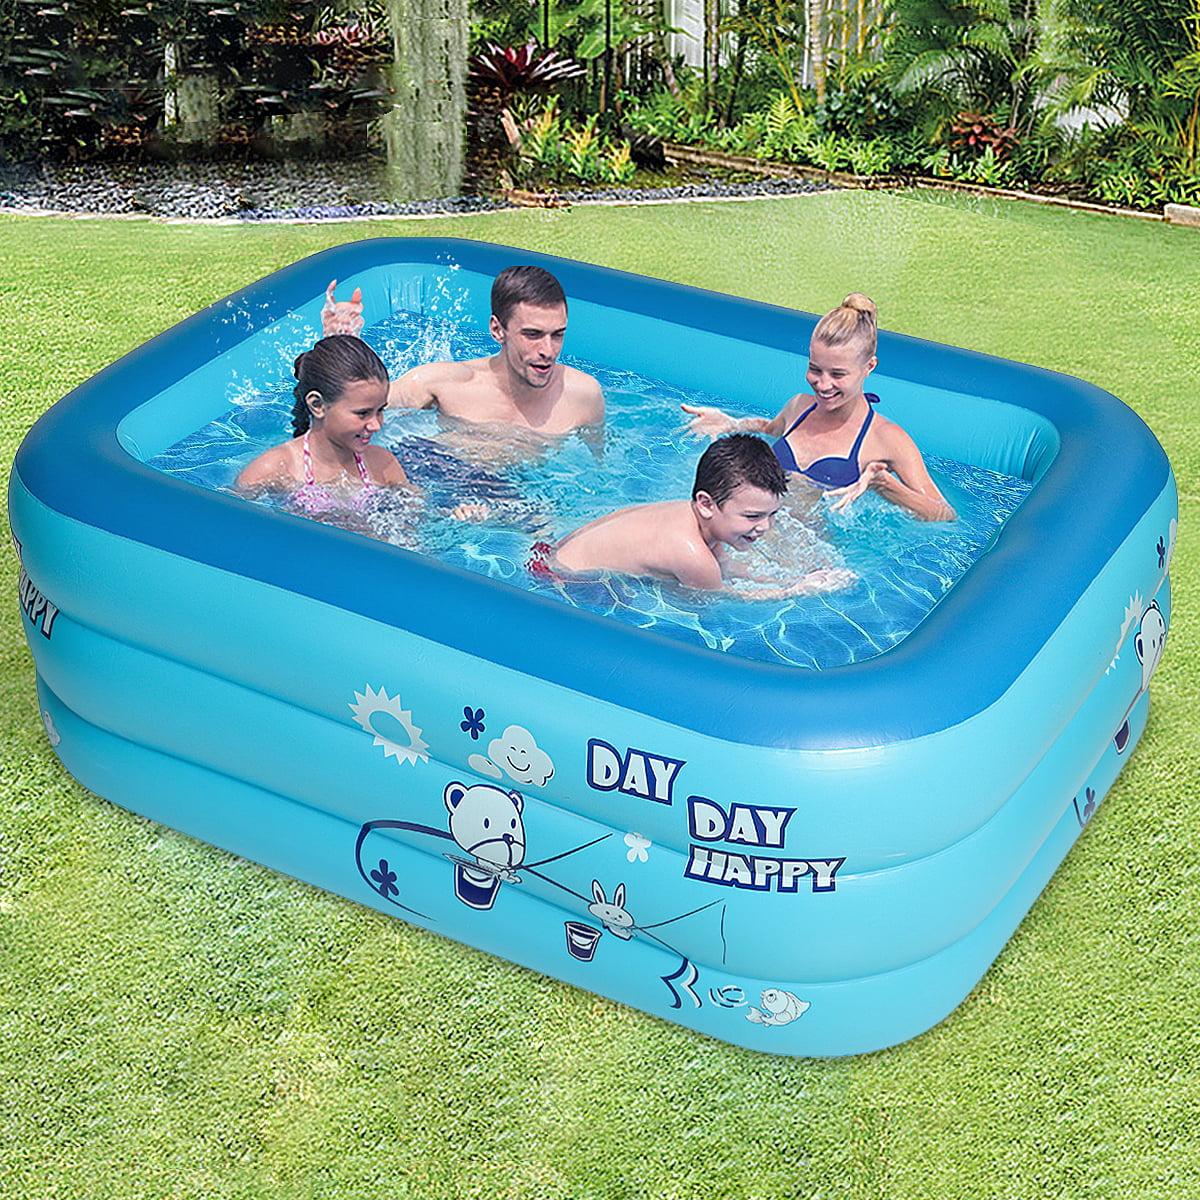 Details about   Rectangular Swiming Pool Above Gound Outdoor Summer Waterproof Kids Family Swim 